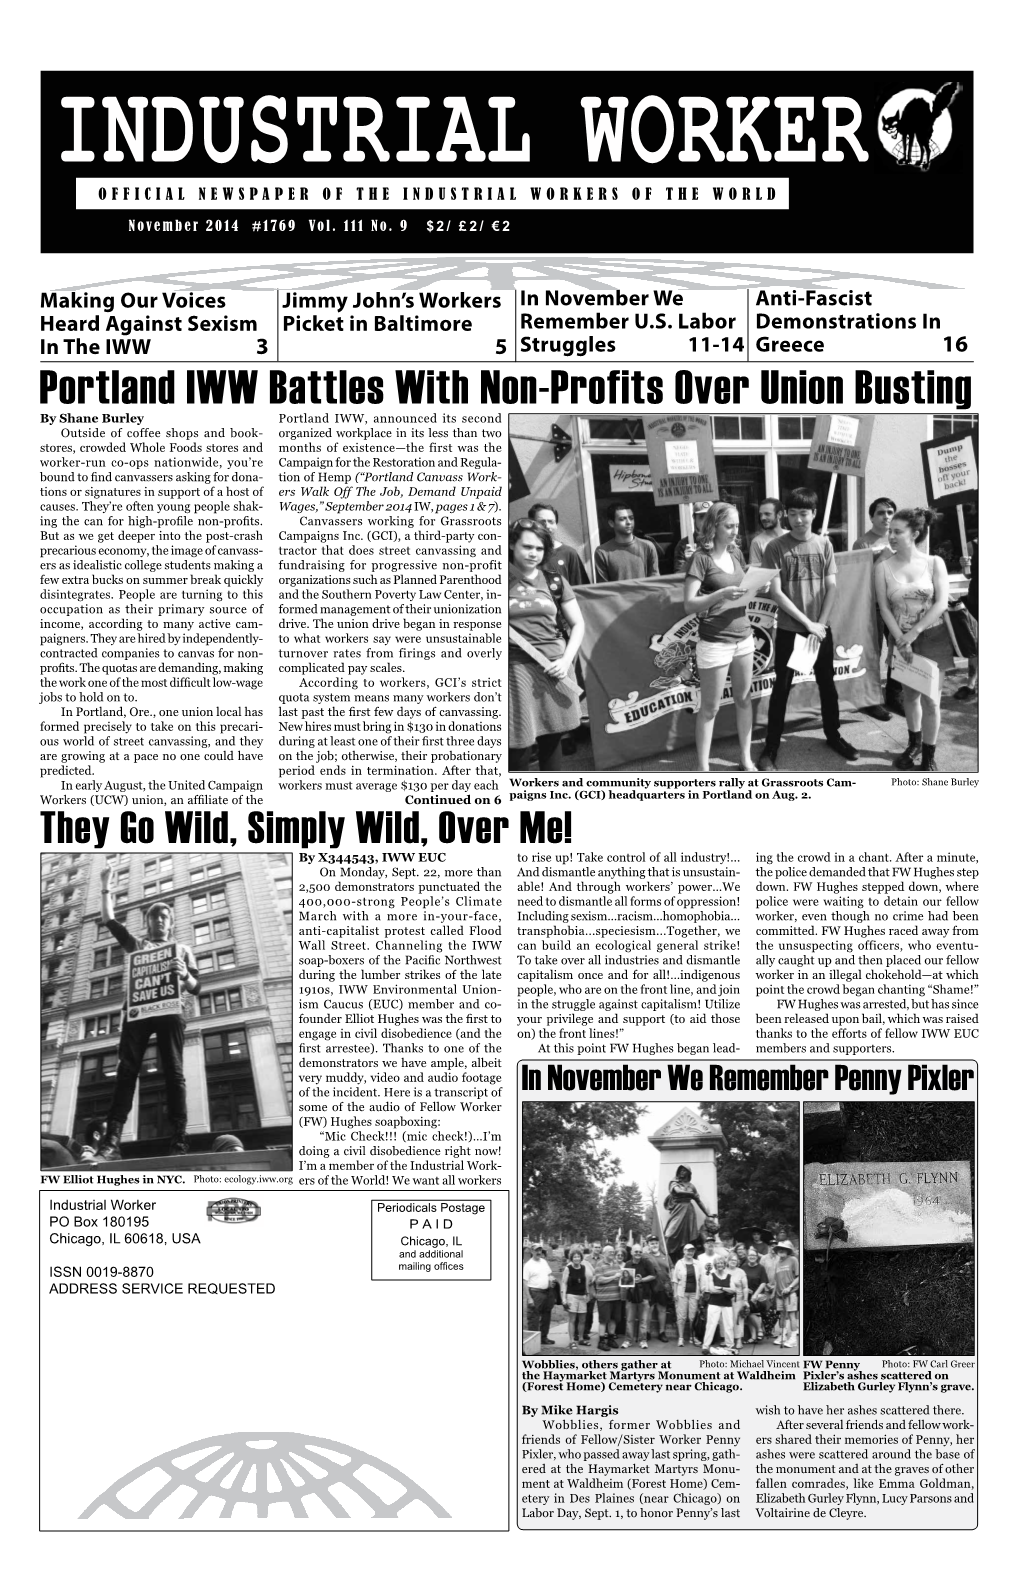 Portland IWW Battles with Non-Profits Over Union Busting